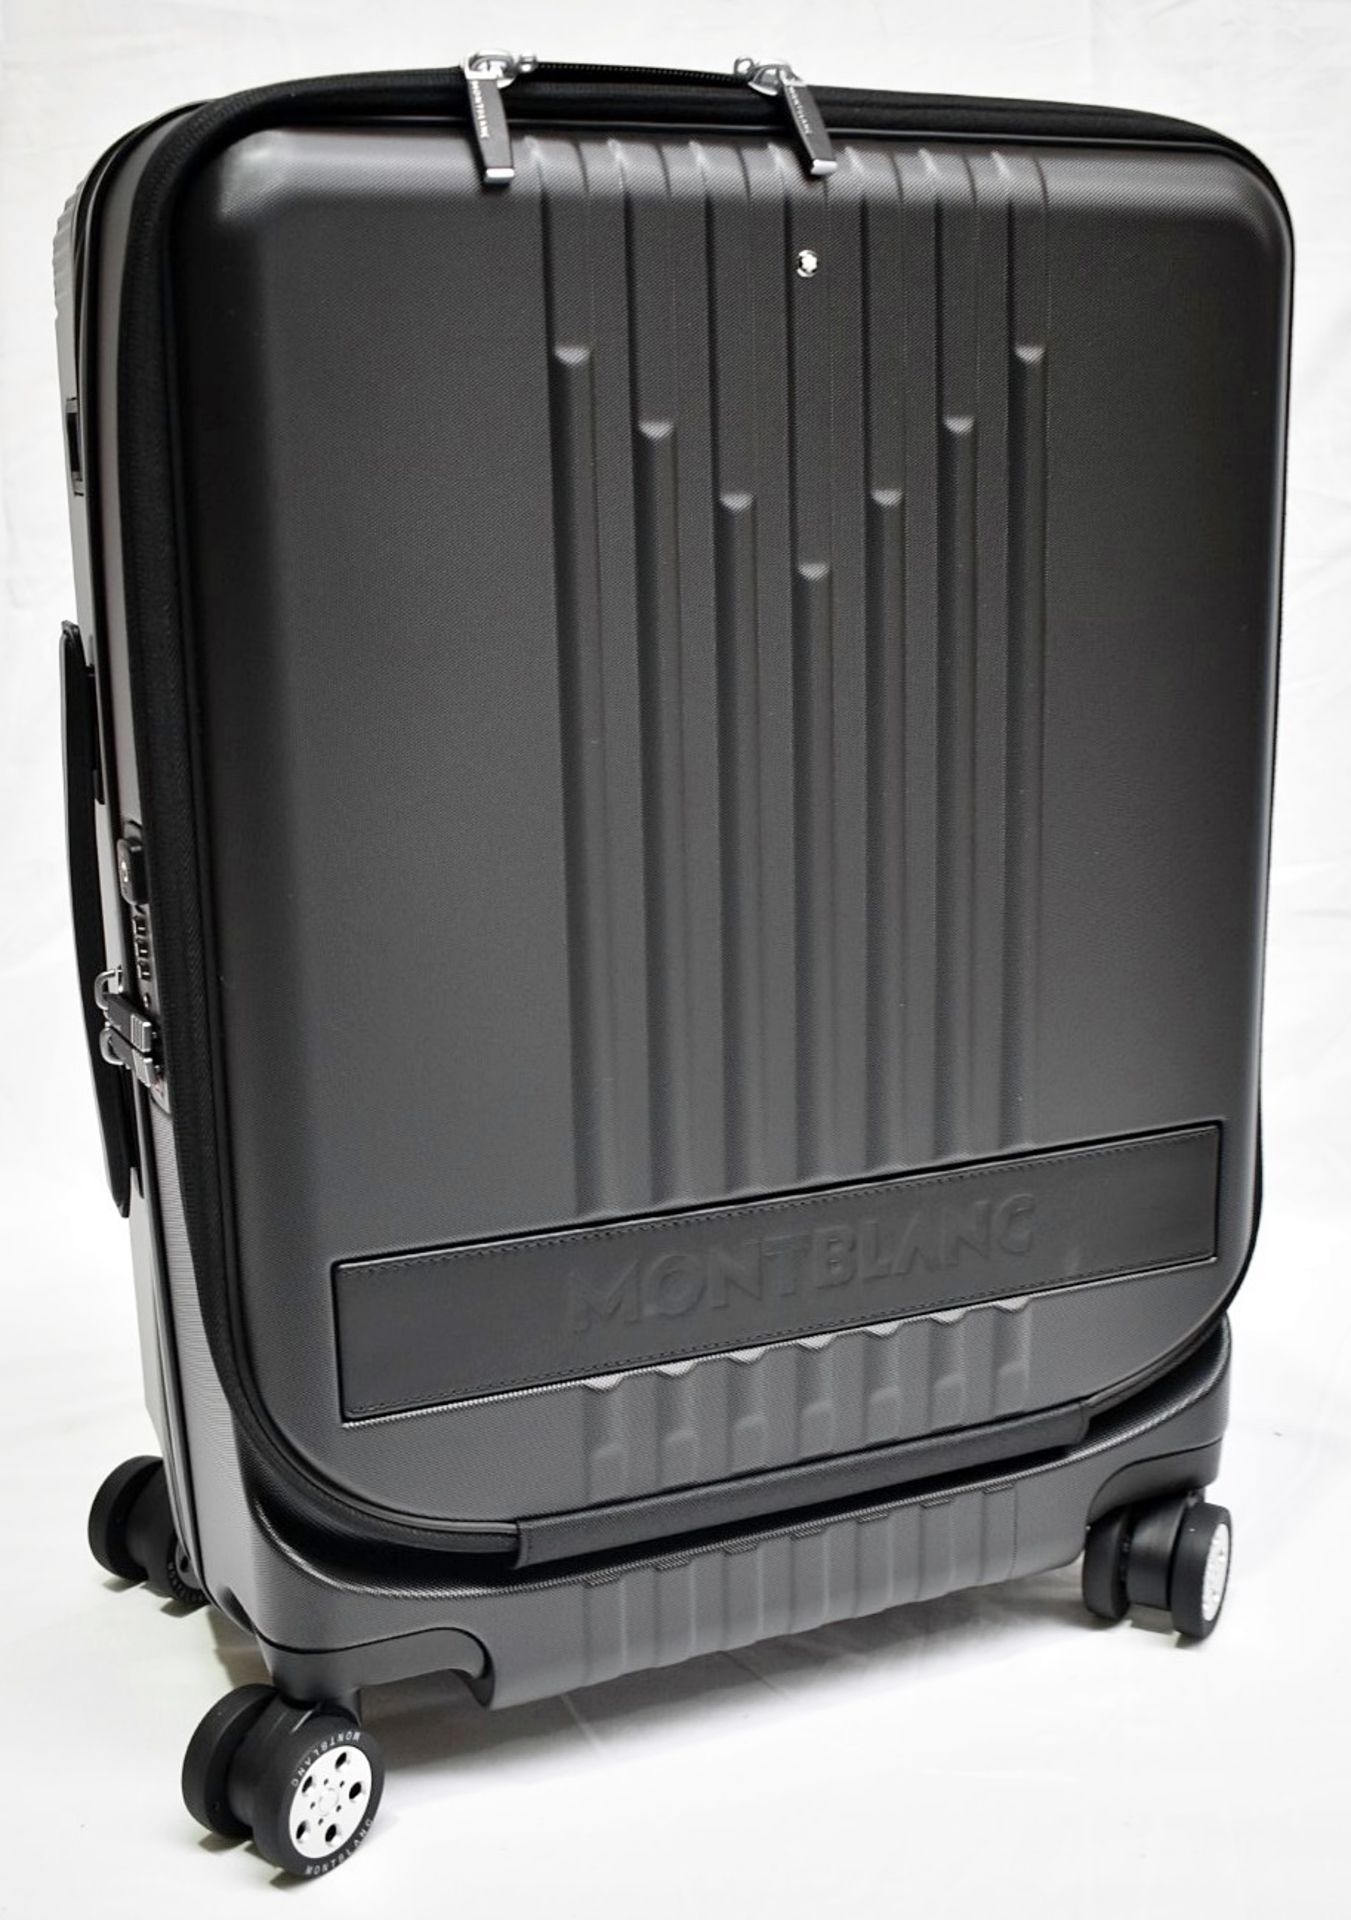 1 x MONTBLANC Polycarbonite Hand Luggage Cabin Trolley (55cm) - Original RRP £690.00 - Image 2 of 26